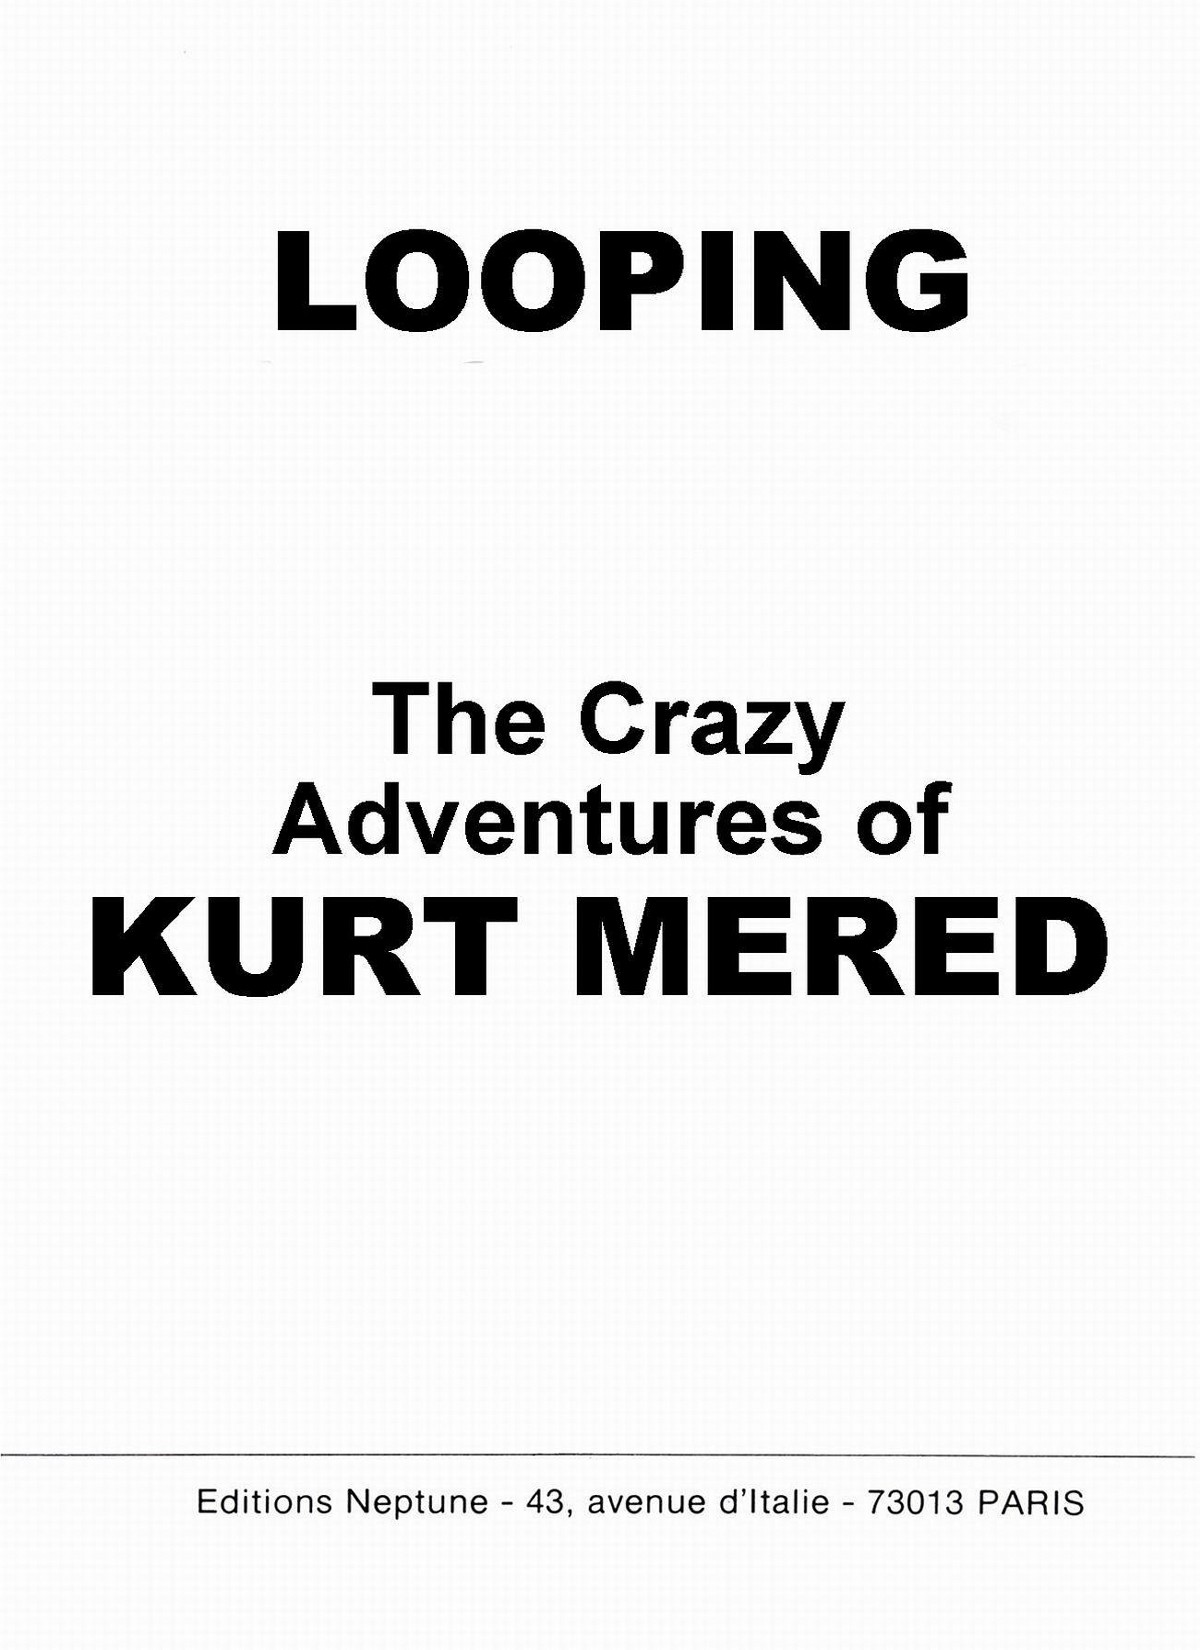 [Looping] The Crazy Adventures of Kurt Mered [English] {Loops} 